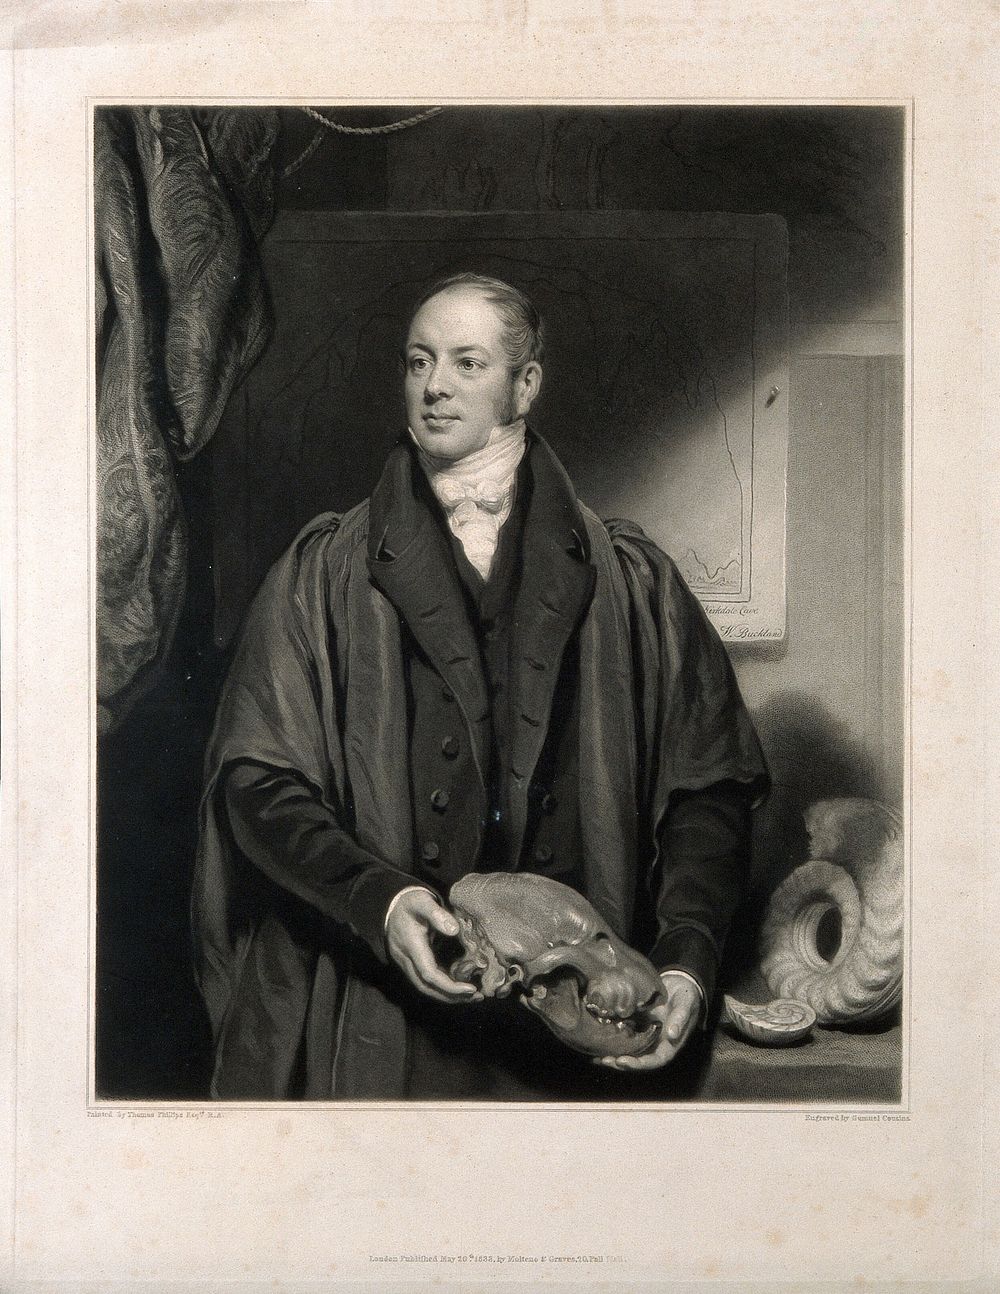 William Buckland. Mezzotint by S. Cousins, 1833, after T. Phillips.